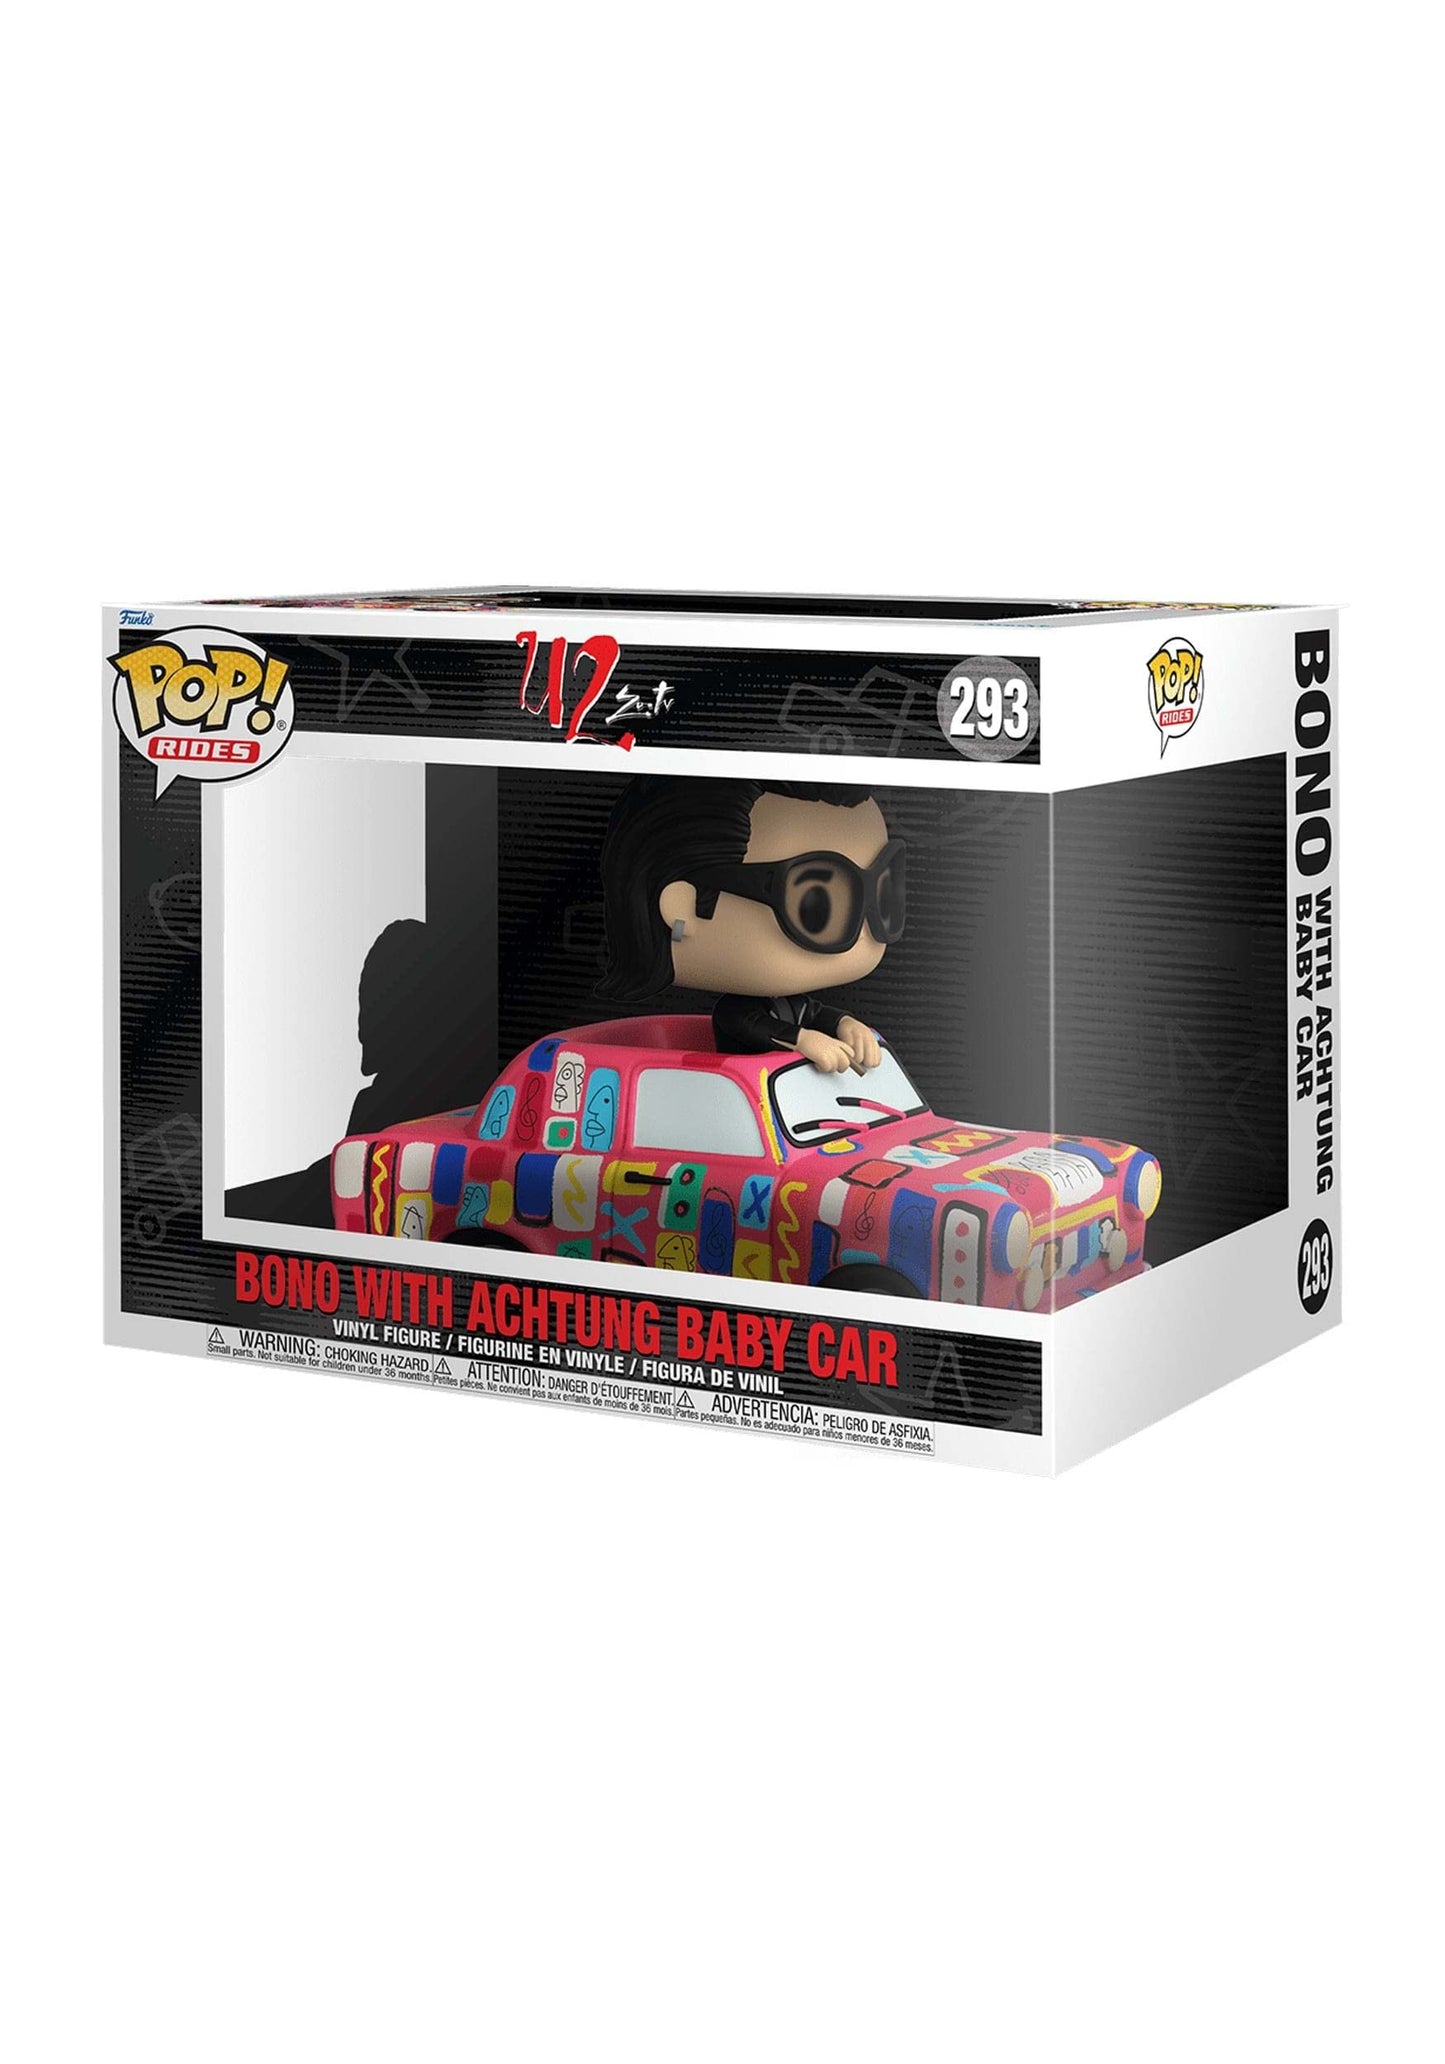 Funko POP! Ride Super Deluxe: U2-AB Car With Bono - Collectable Vinyl Figure - Gift Idea - Official Merchandise - Toys for Kids & Adults - Music Fans - Model Figure for Collectors and Display